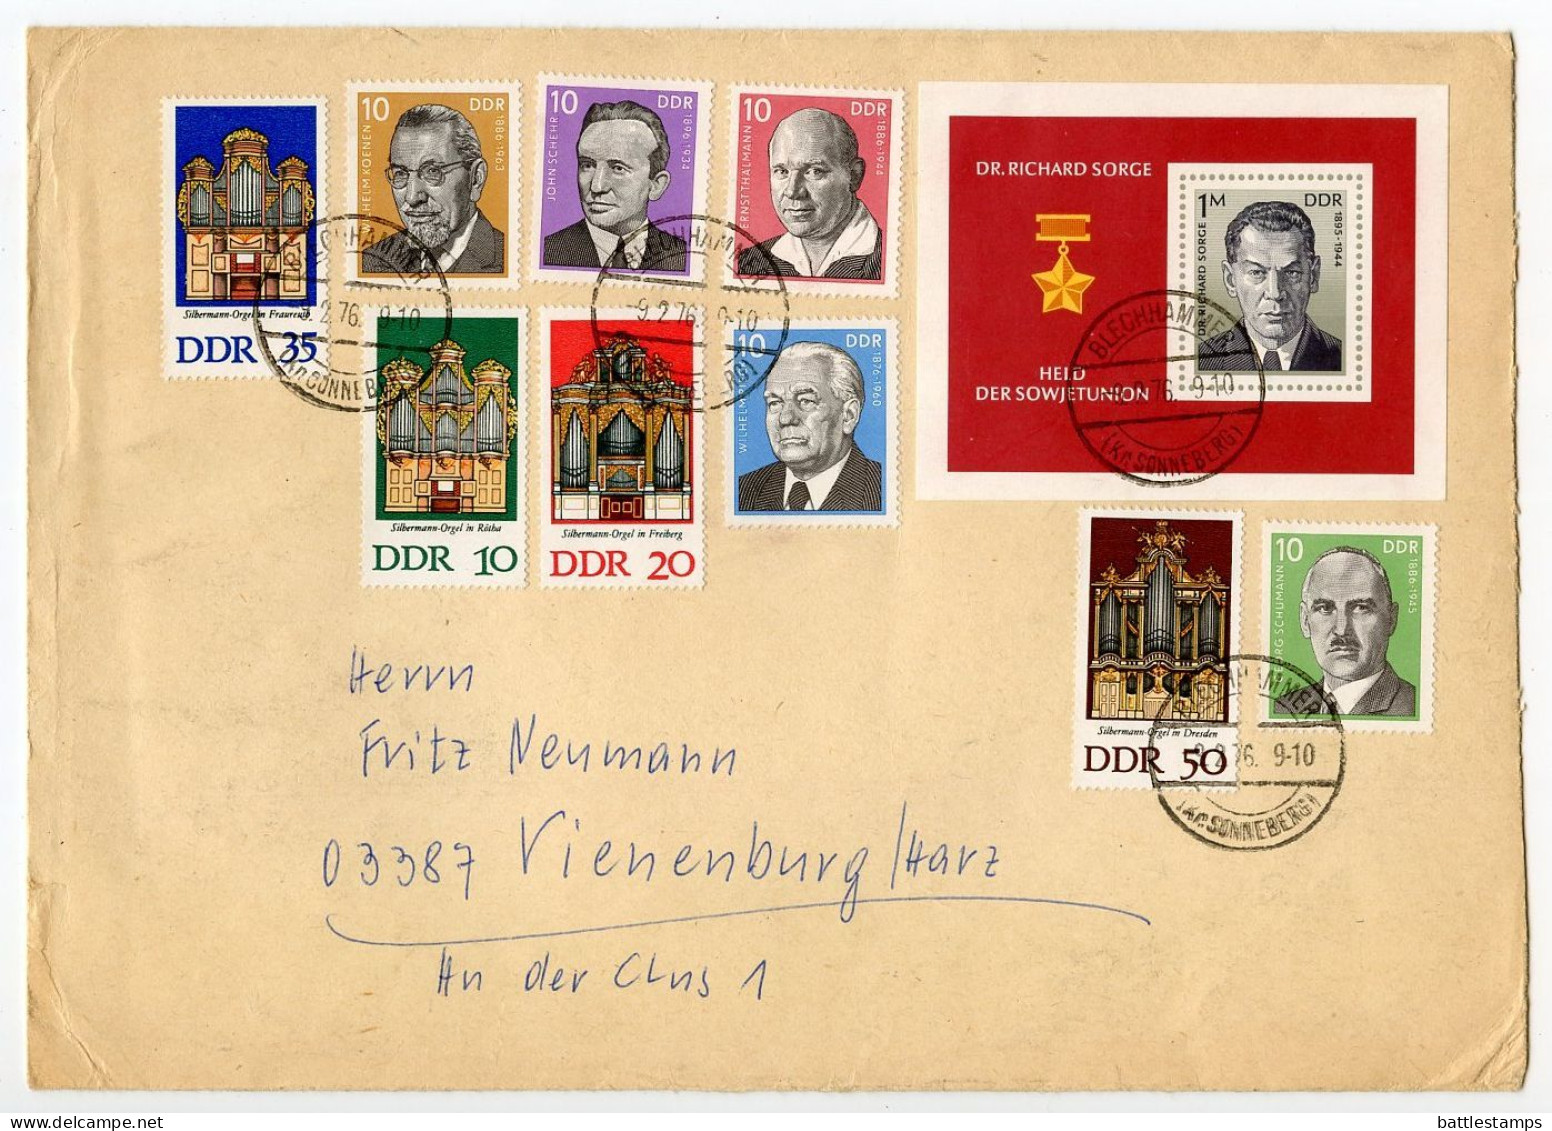 Germany East 1976 Cover; Blechhammer To Vienenburg; Stamps - Silberman Organs, Sorge S/S, President Pieck, Labor Leaders - Briefe U. Dokumente